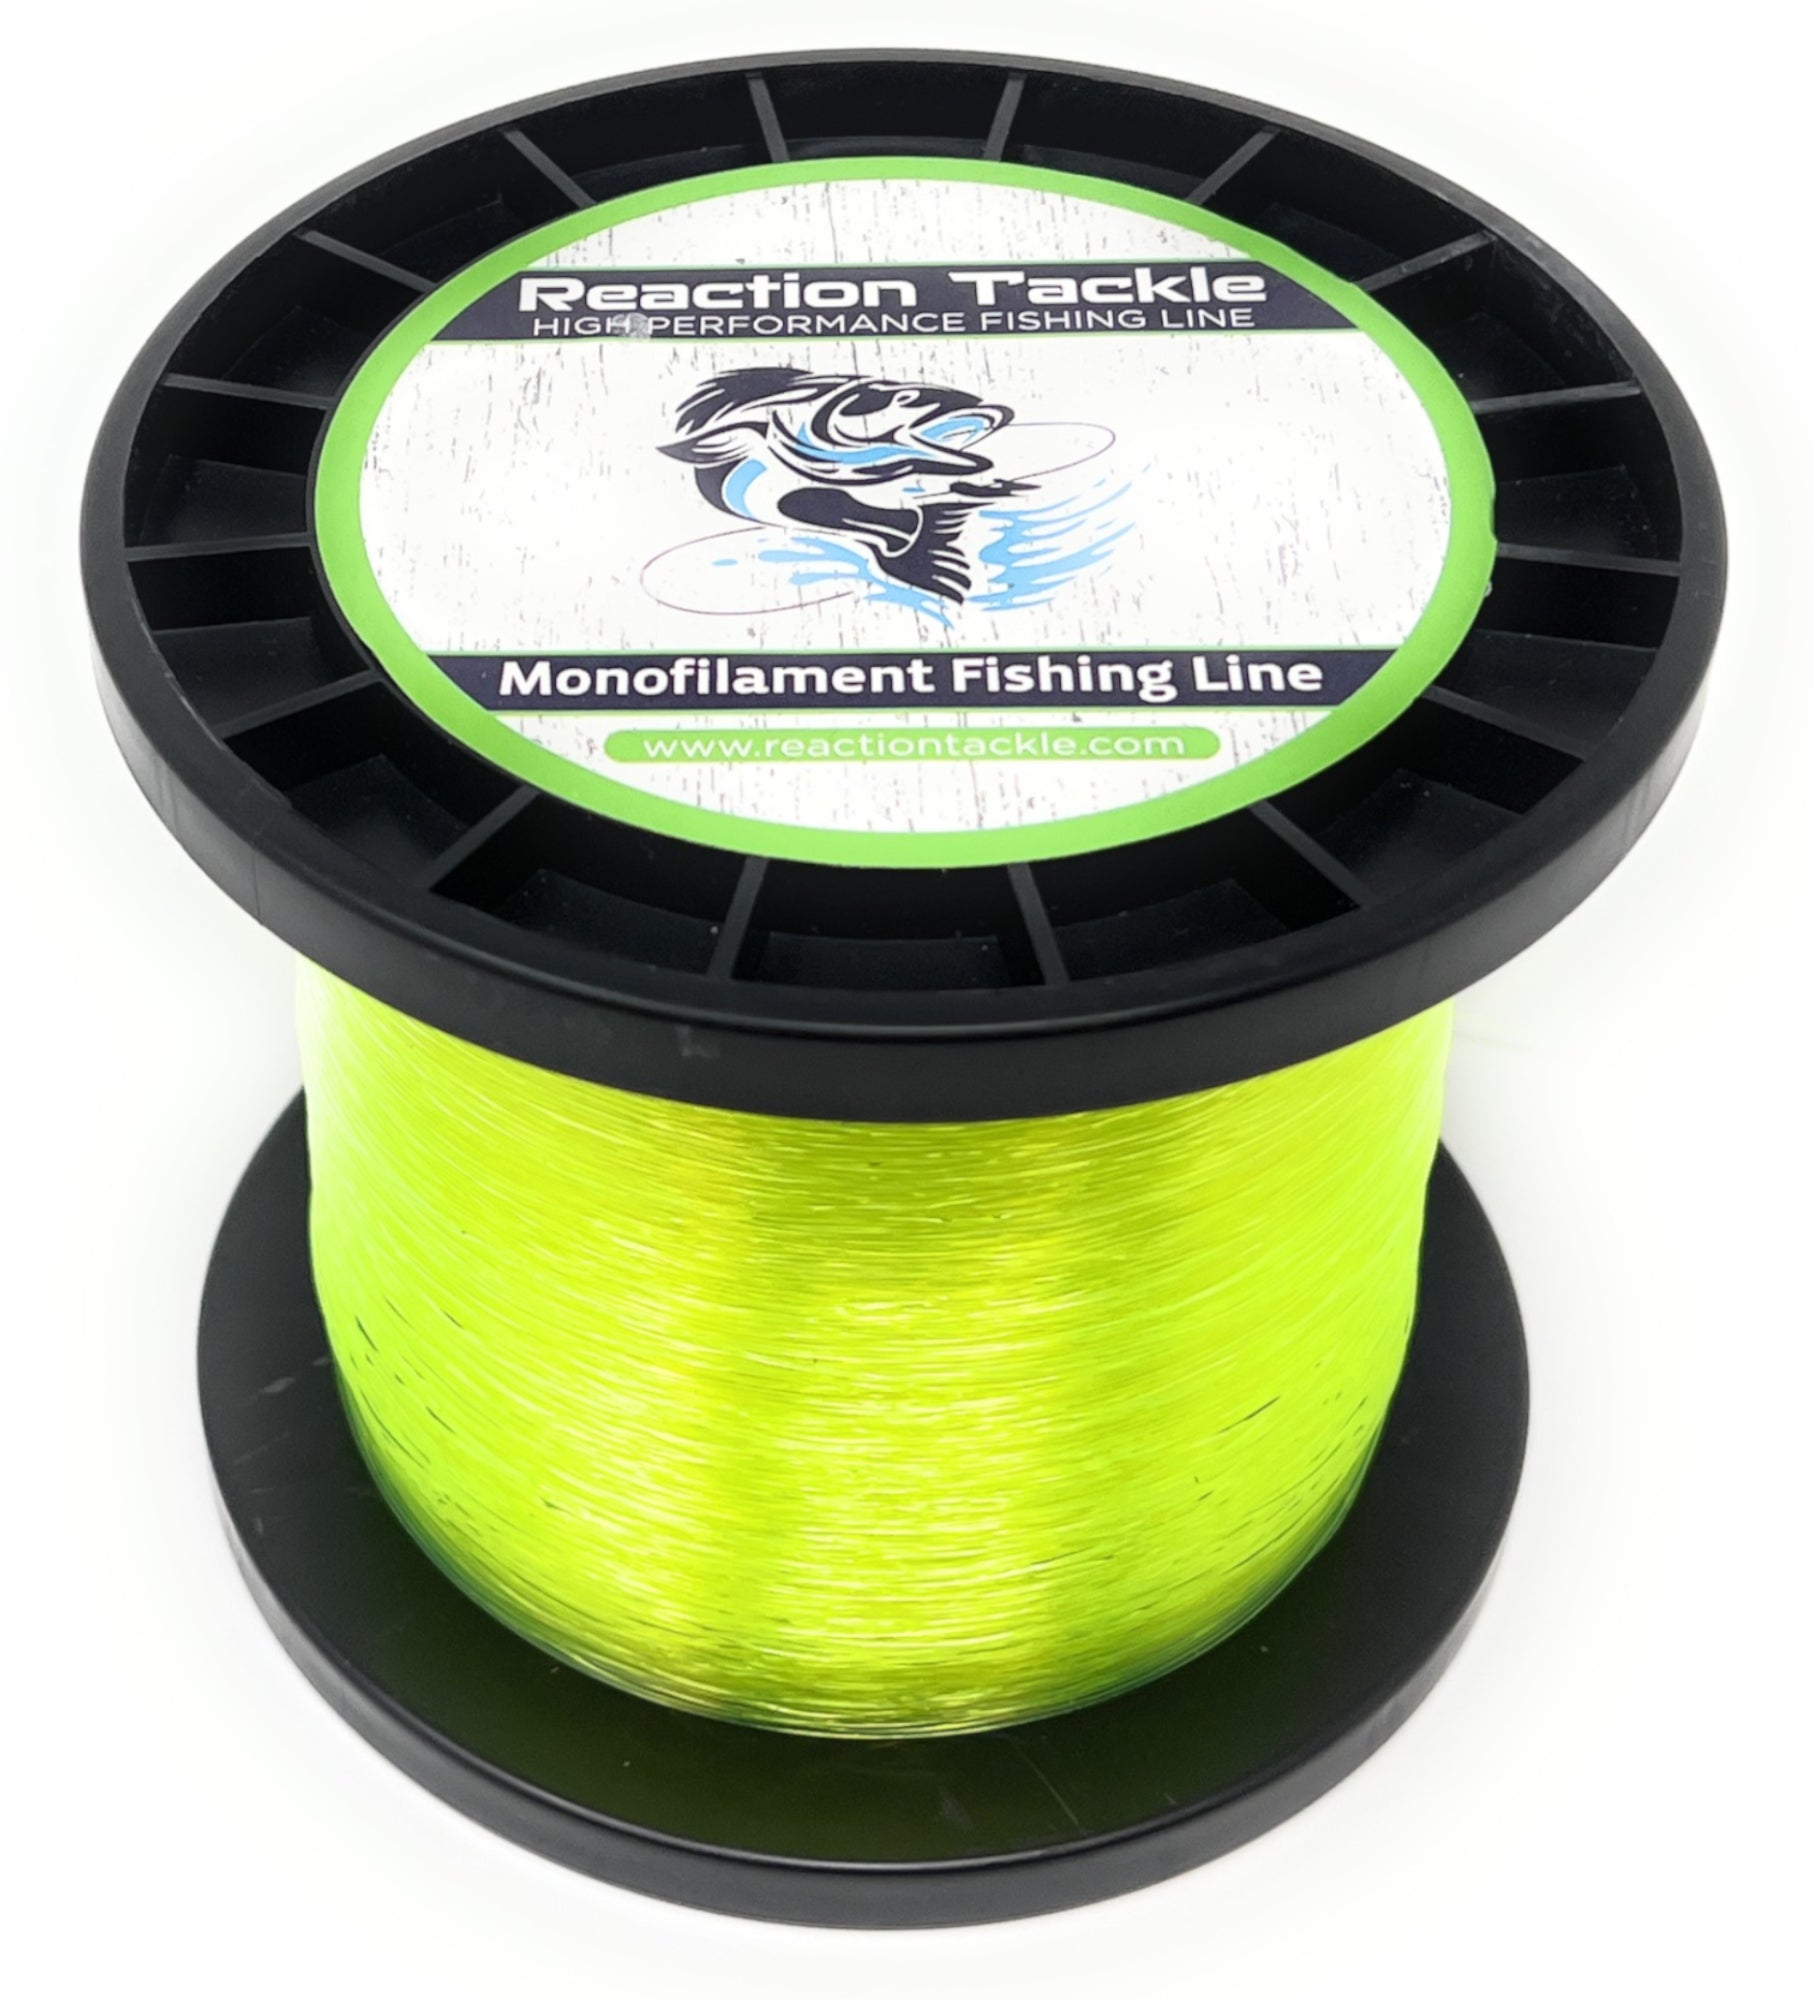 Reaction Tackle 9 Strand Braided Fishing Line